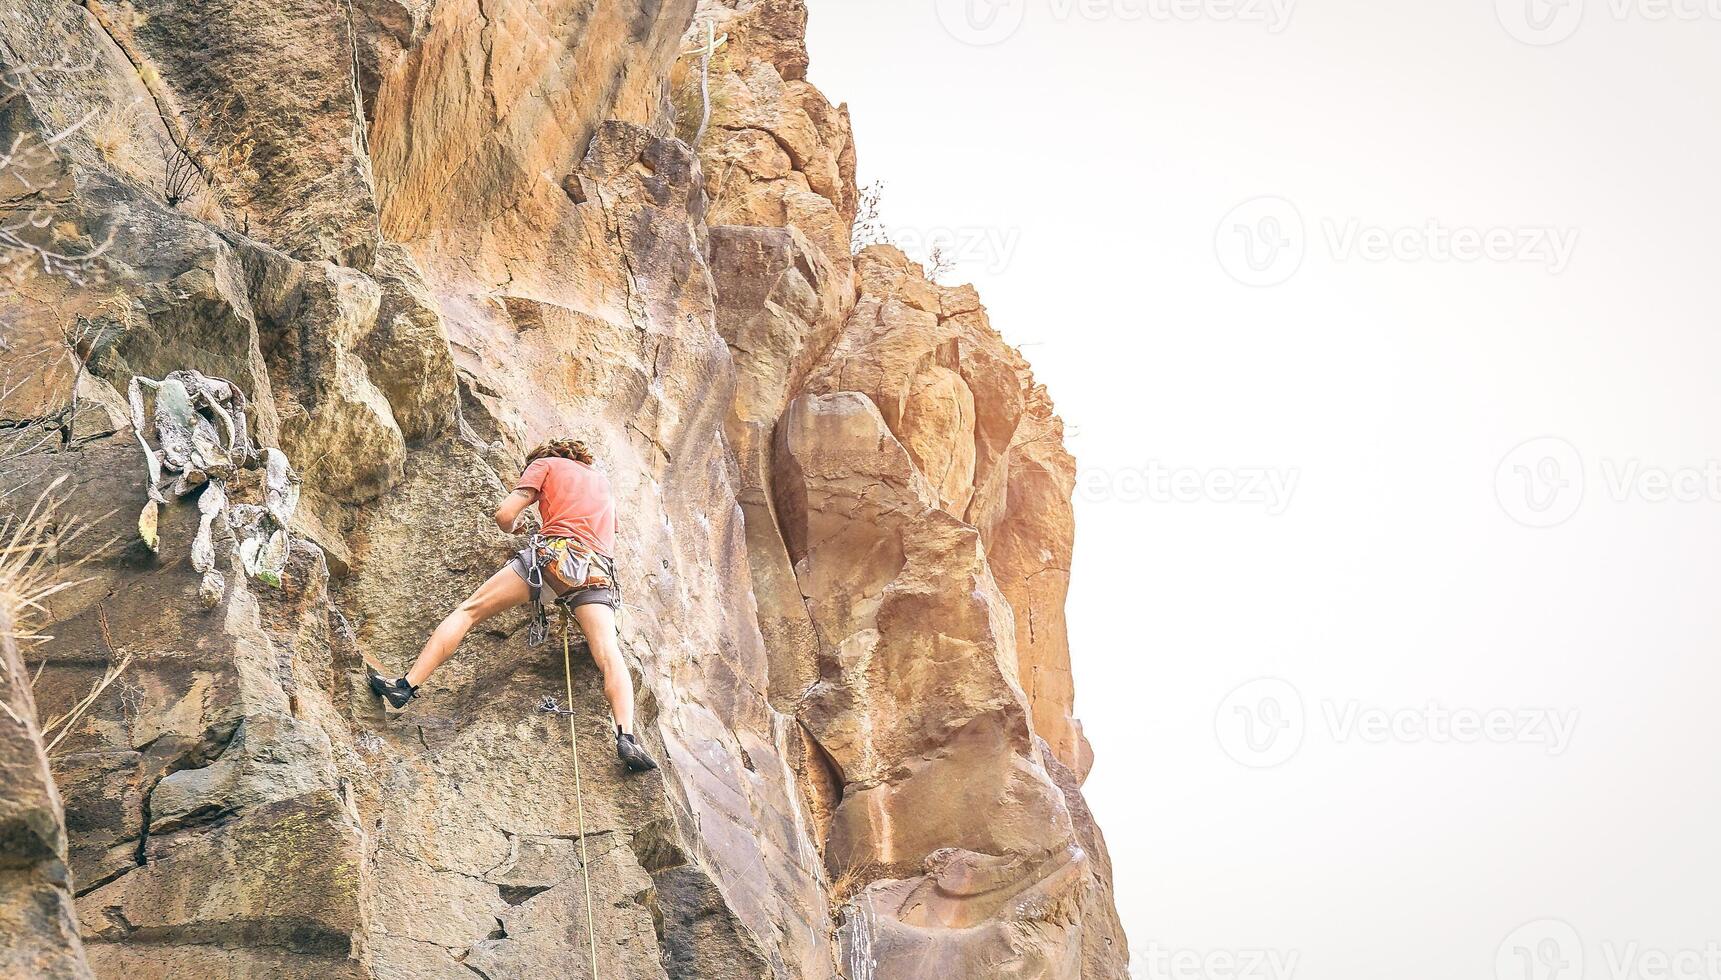 Athletic man clambing a rock wall at sunset - Climber performing on a canyon mountain - Concept of Sport and extreme lifestyle photo